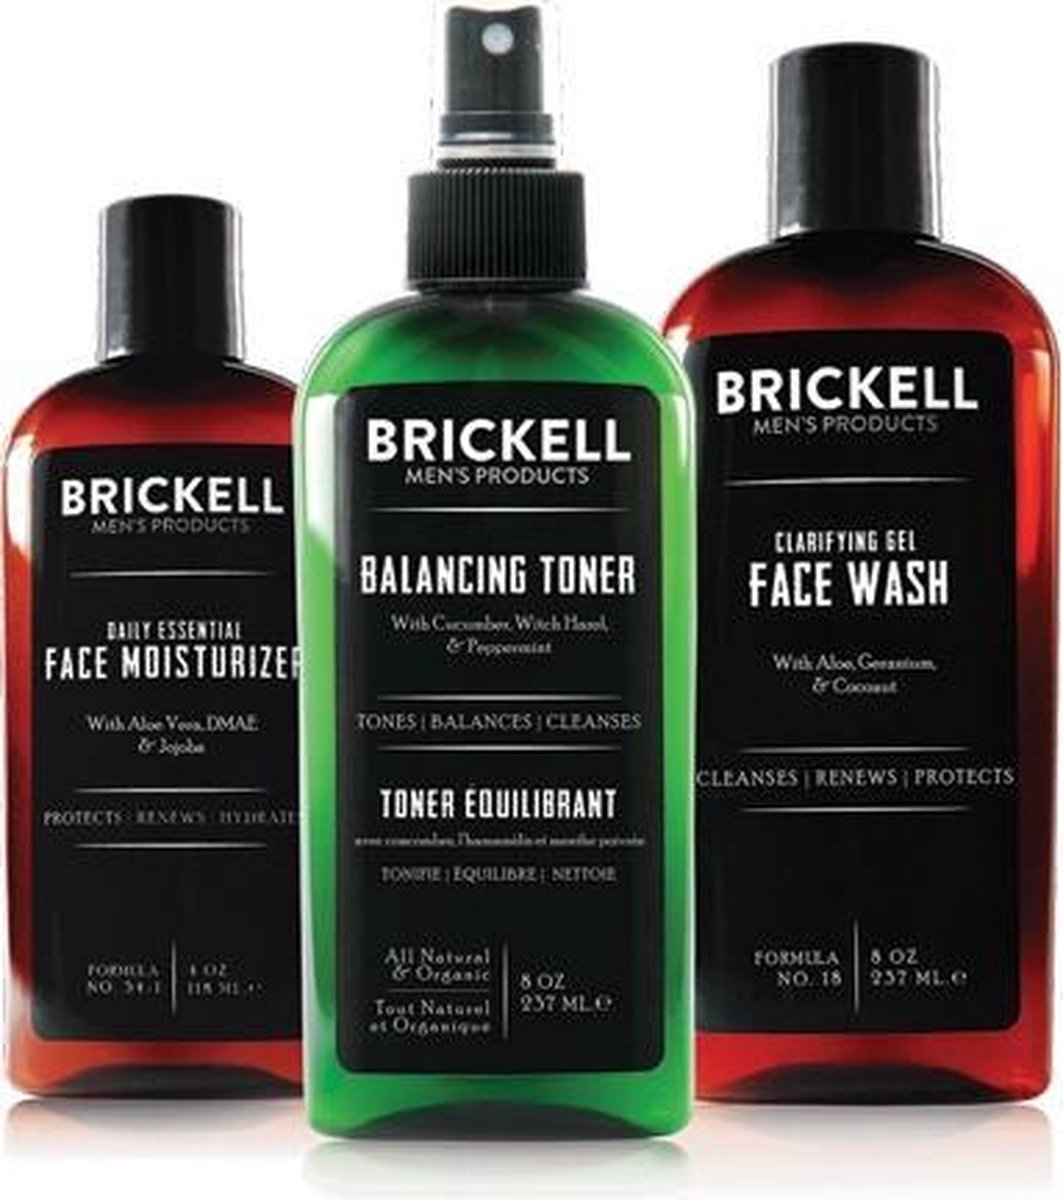 Brickell Daily Face Cleanse Routine for Oily Skin